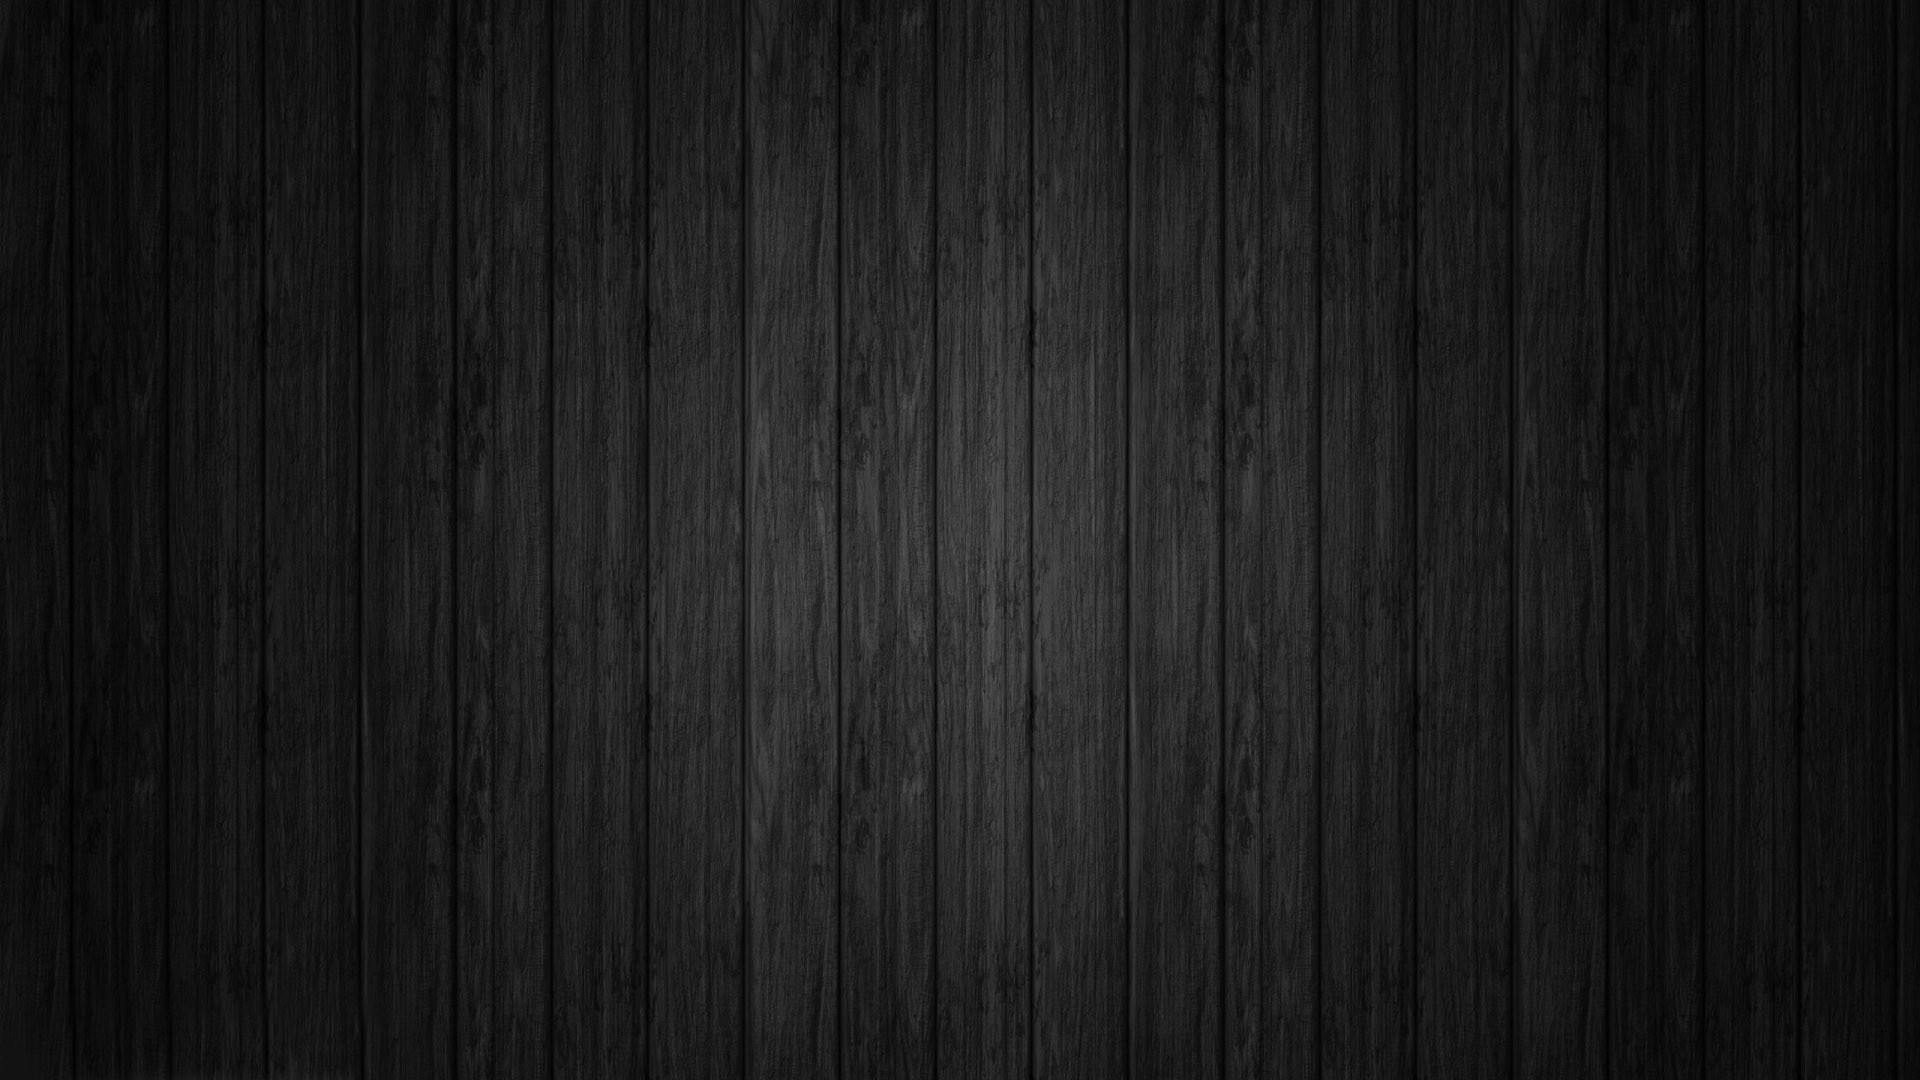 Title Carbon Wallpapers Group 69 Dimension 1920 X 1080 File Type Jpg Jpeg 1920x1080